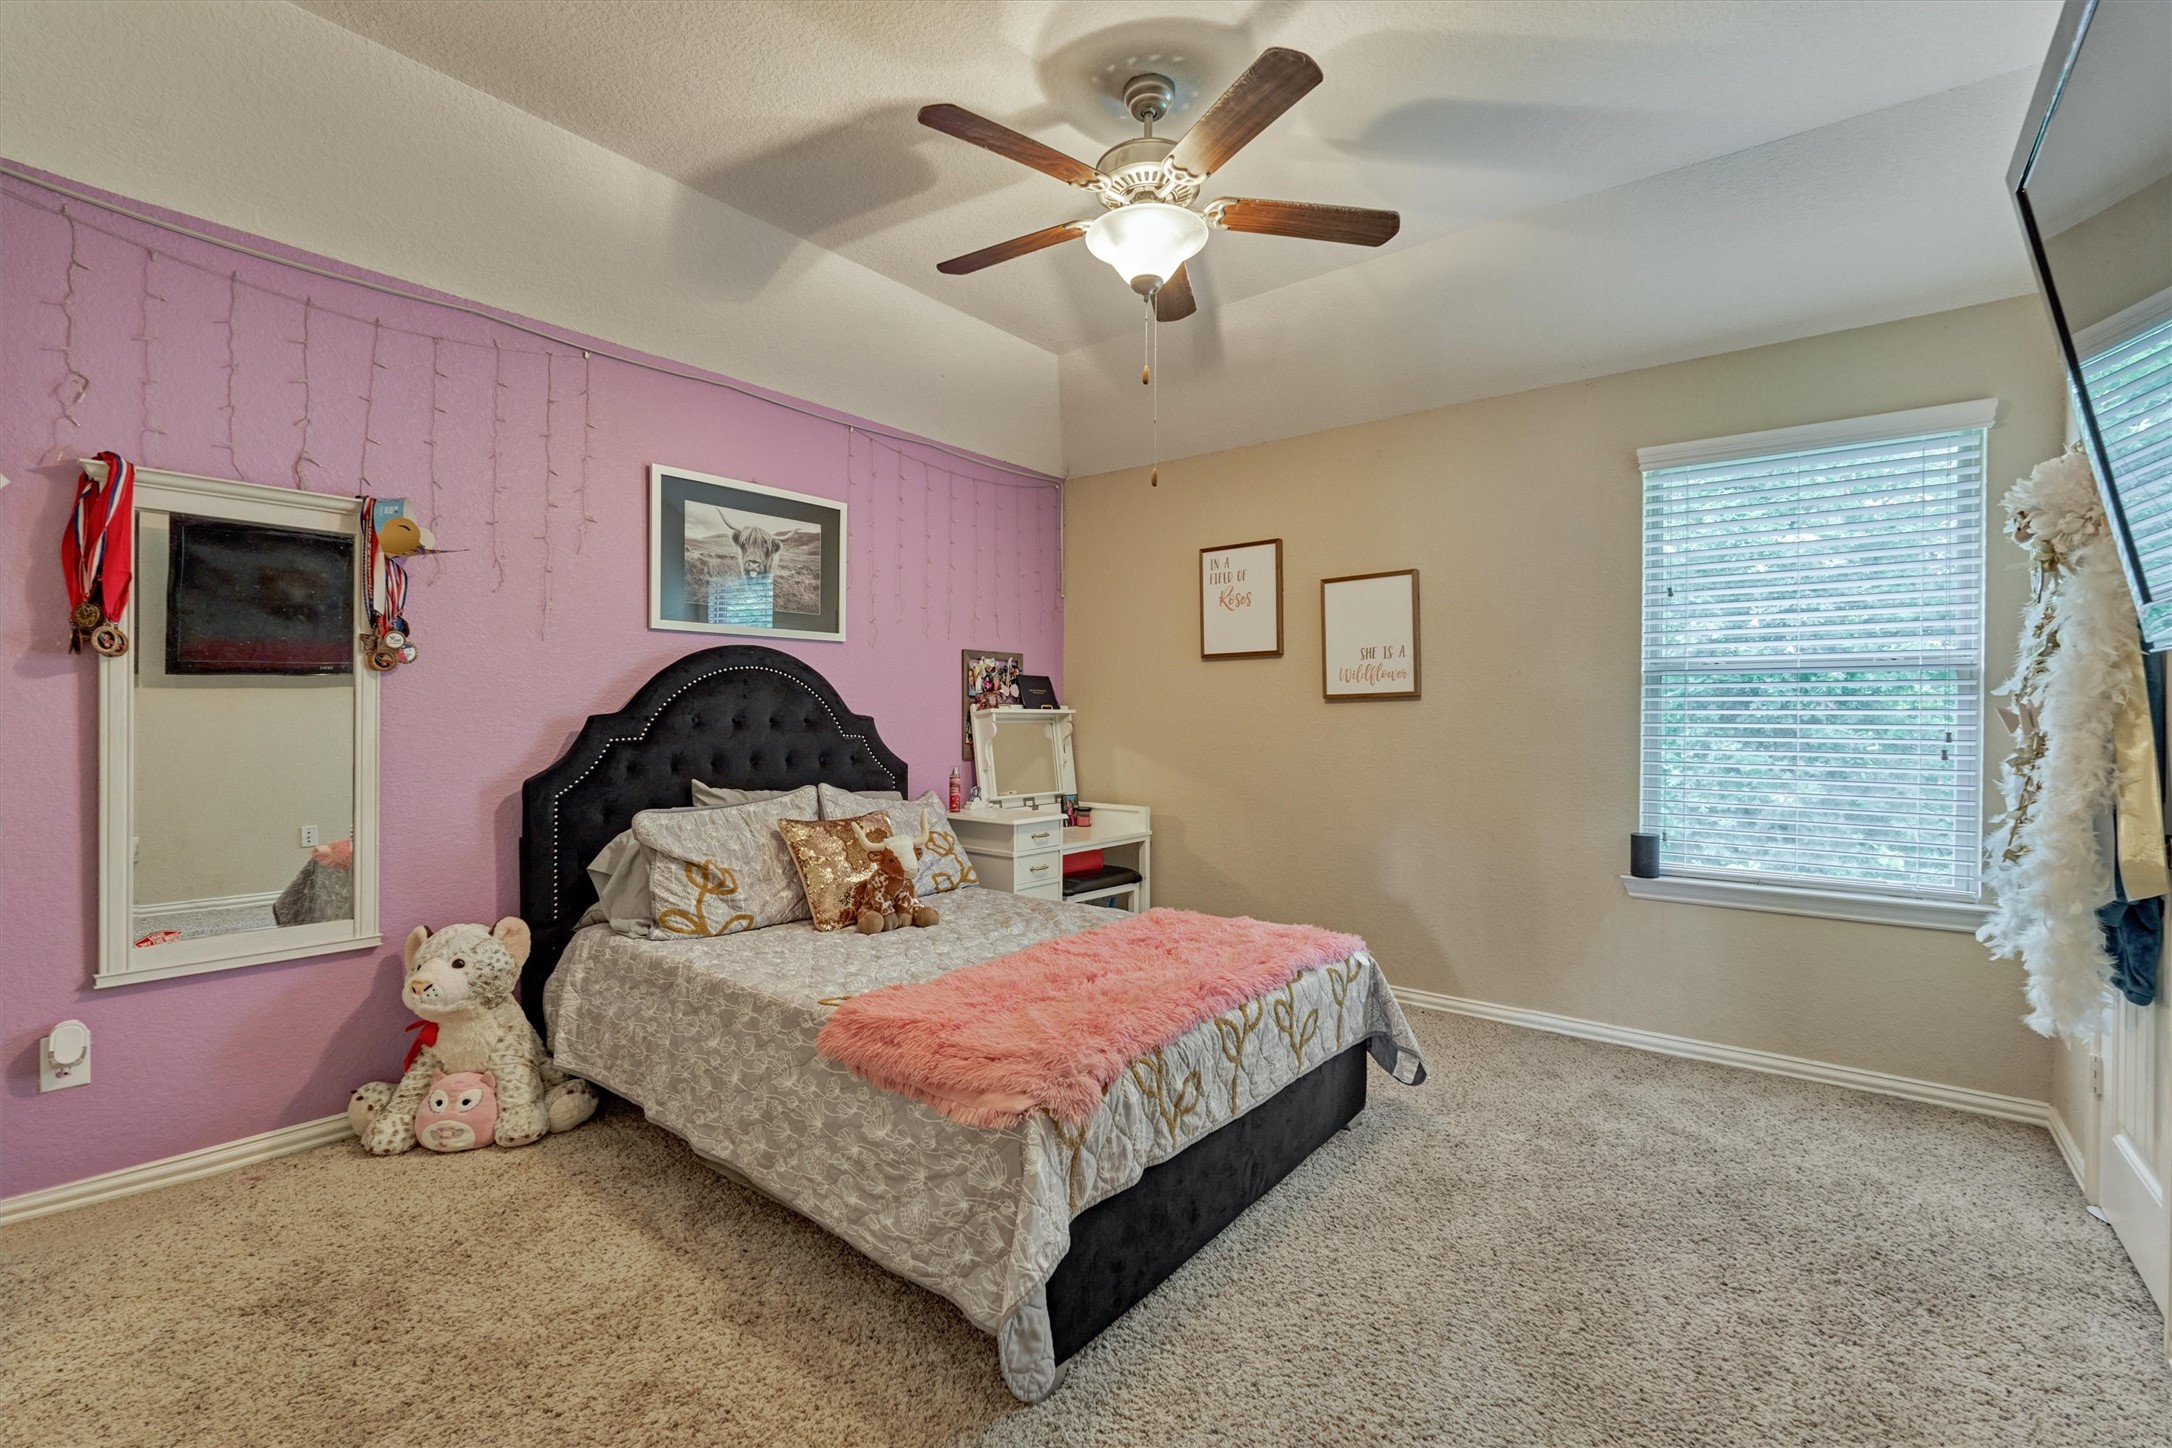 All of the bedrooms are spacious and enjoy large closets. Note the natural light, decorator colors, and upgraded ceiling fan.